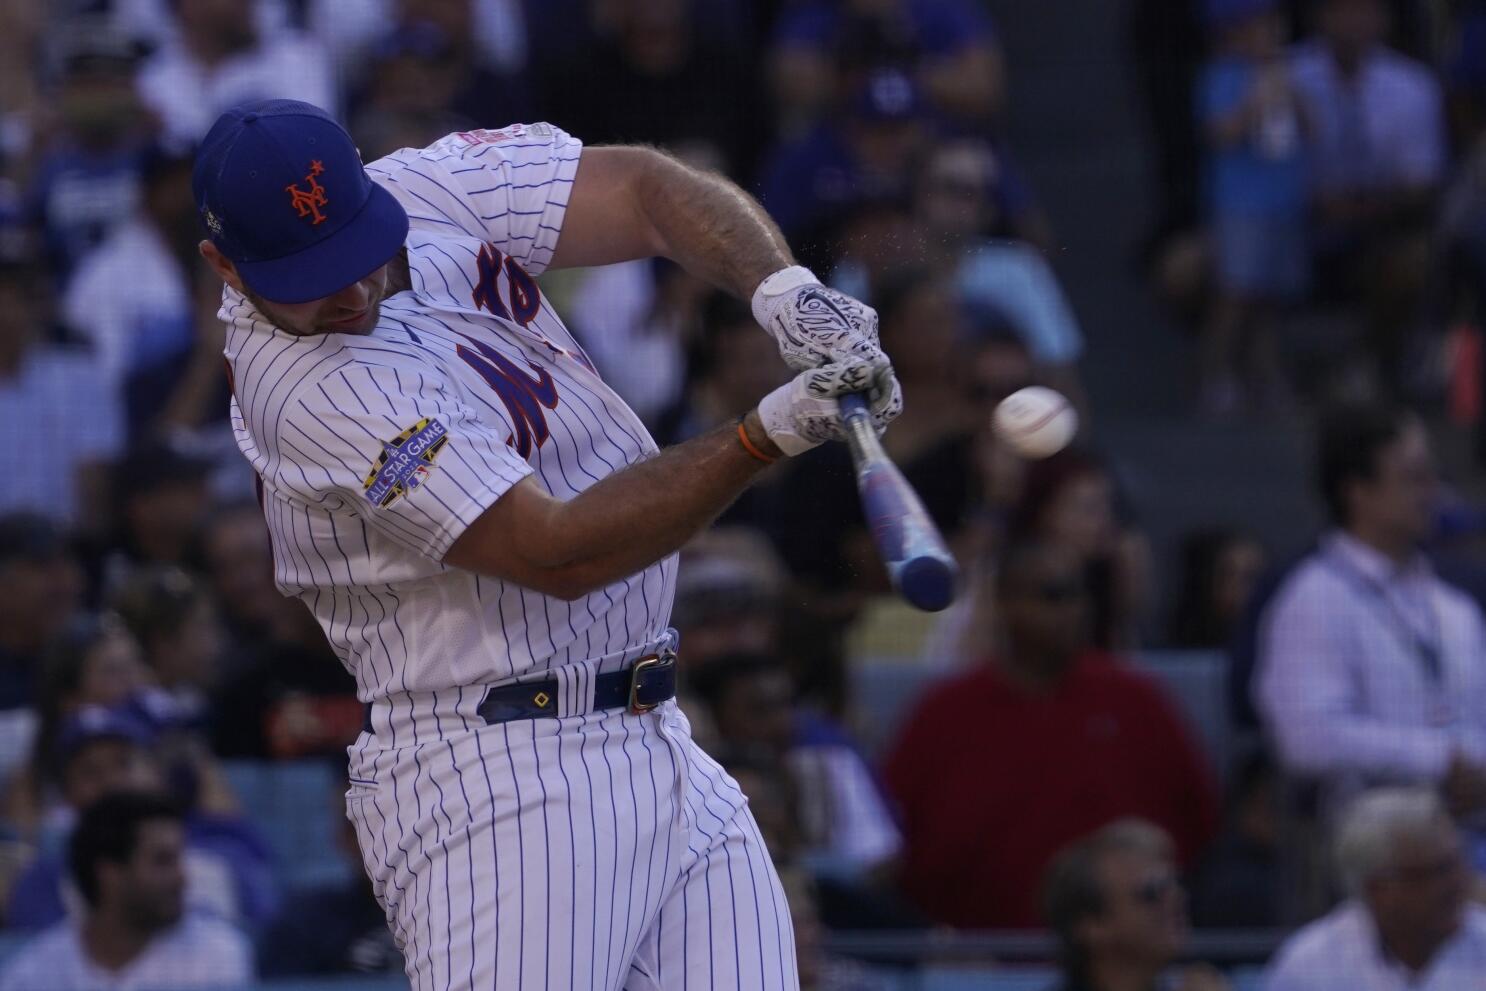 Pete Alonso's Home Run Derby pitcher swapped due to injury